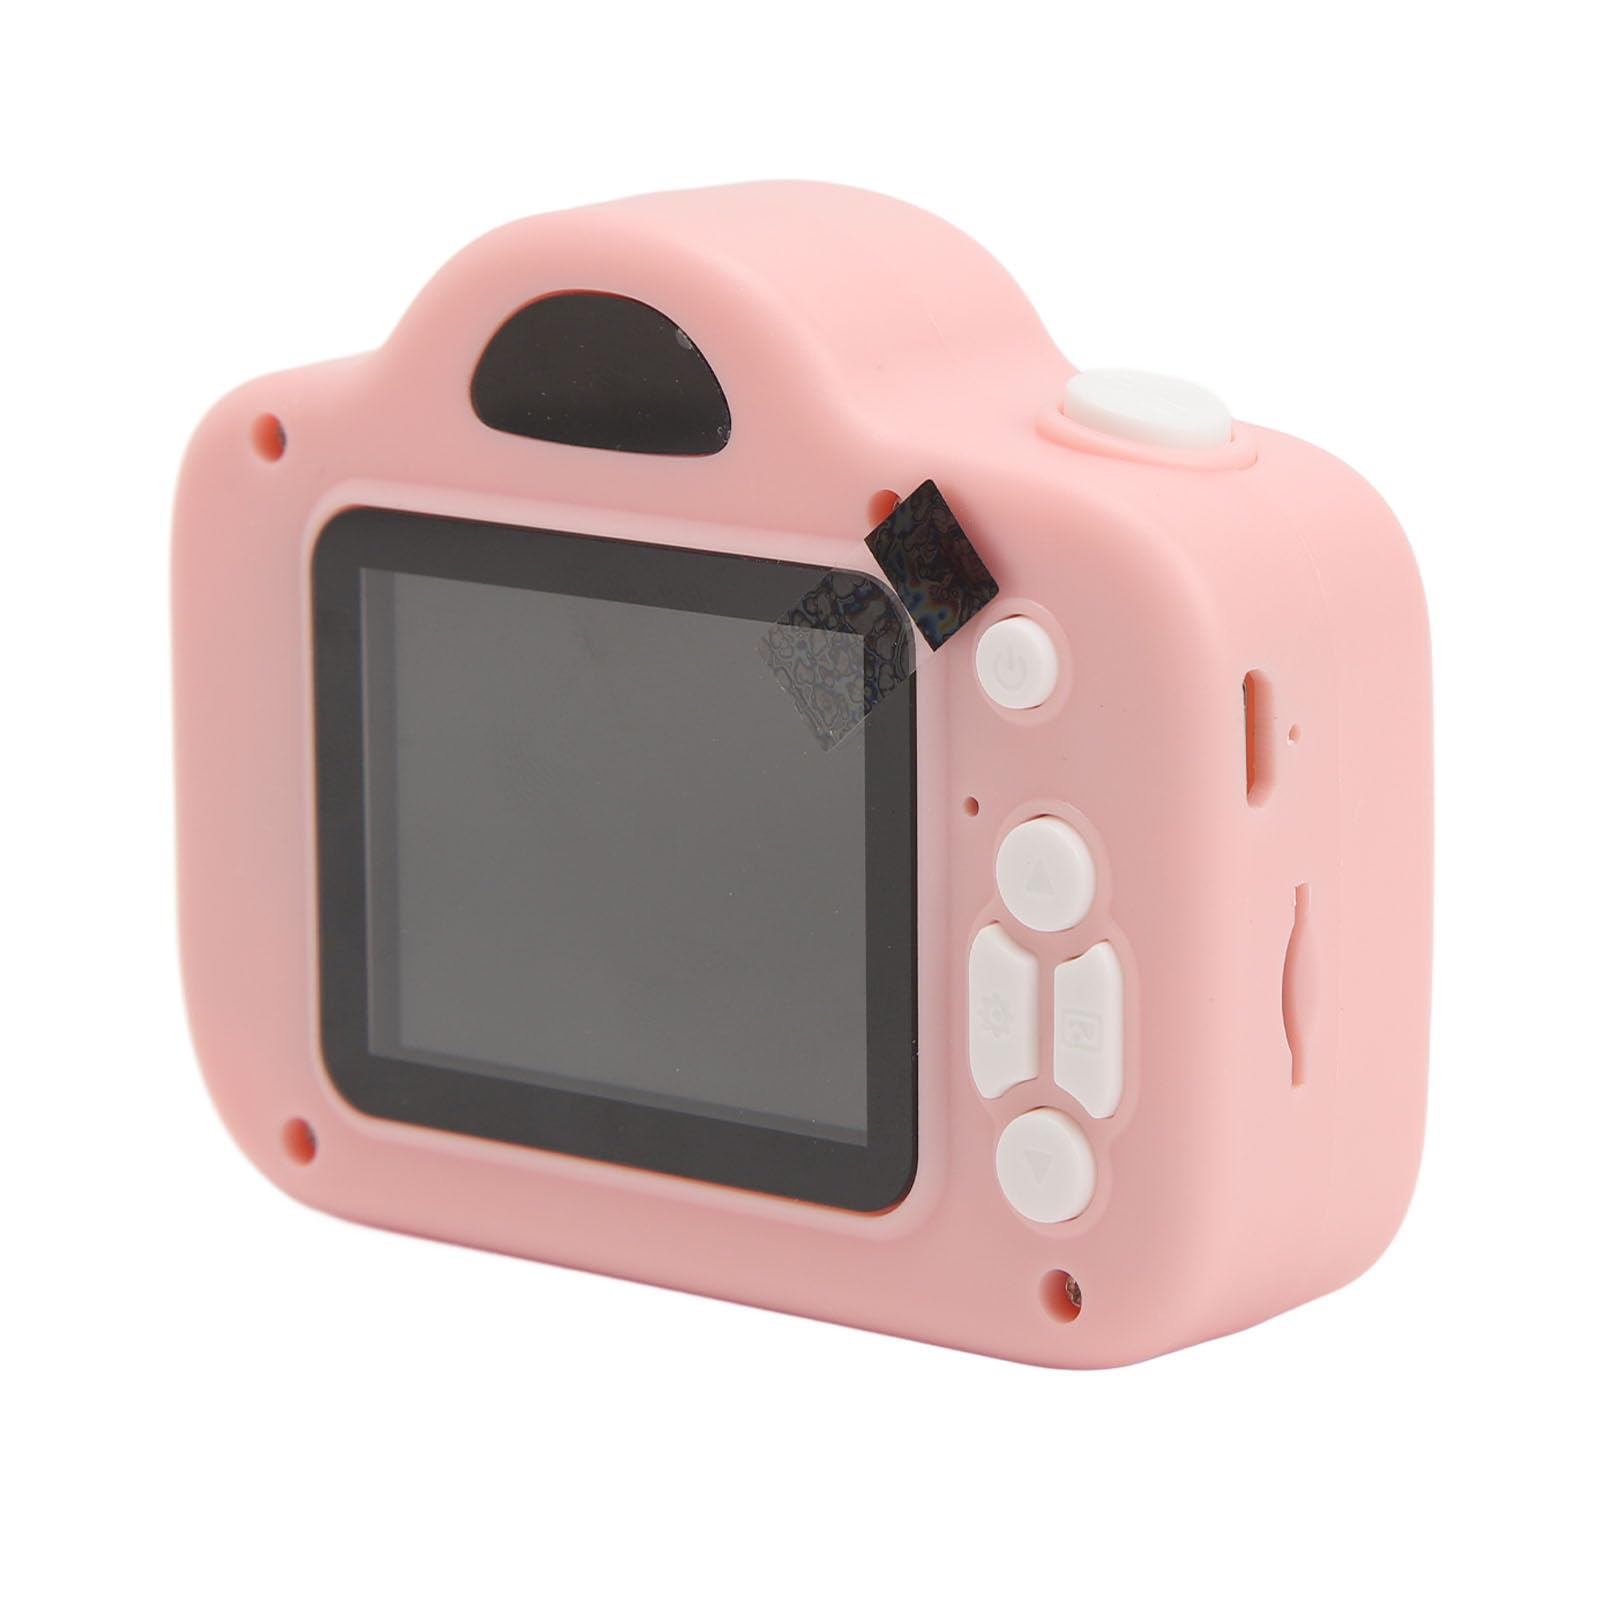 Kids Digital Camera, Photography Camera Automatic Focusing Single Lens for Early Education (Pink)